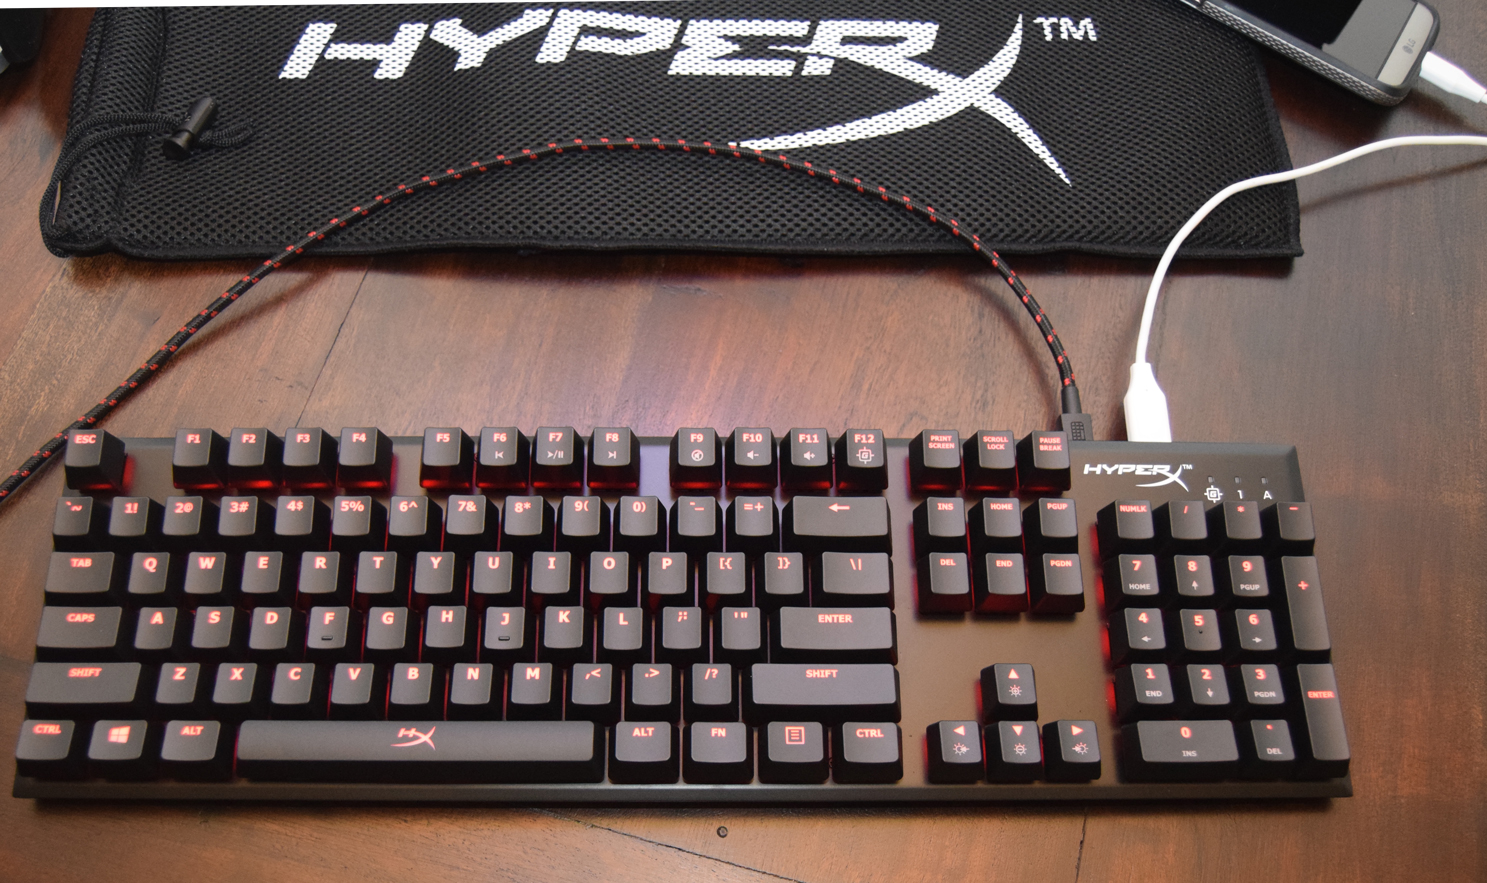 HyperX Alloy FPS Mechanical Gaming Keyboard review in use while charging phone and lit